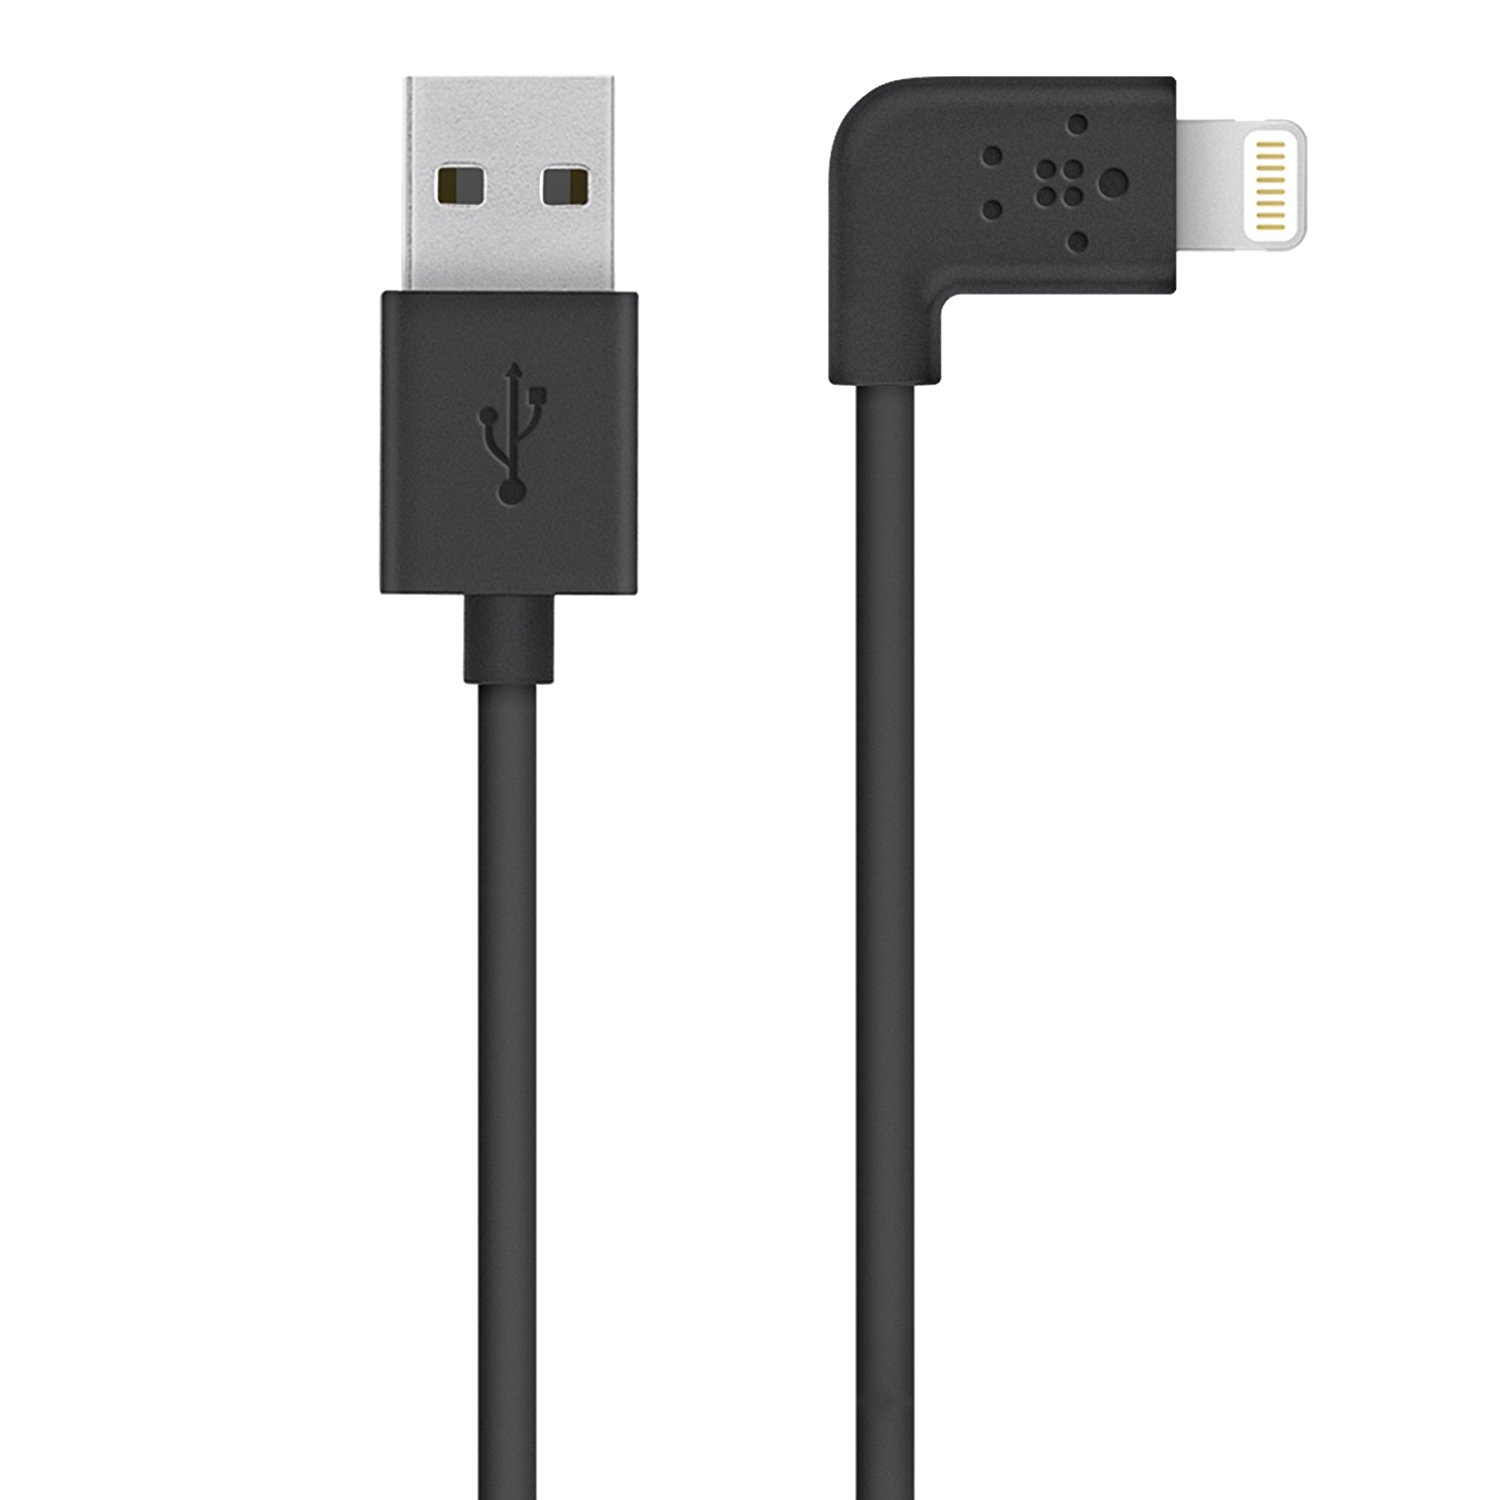 Belkin 2.4amp Cable iPhone iPad